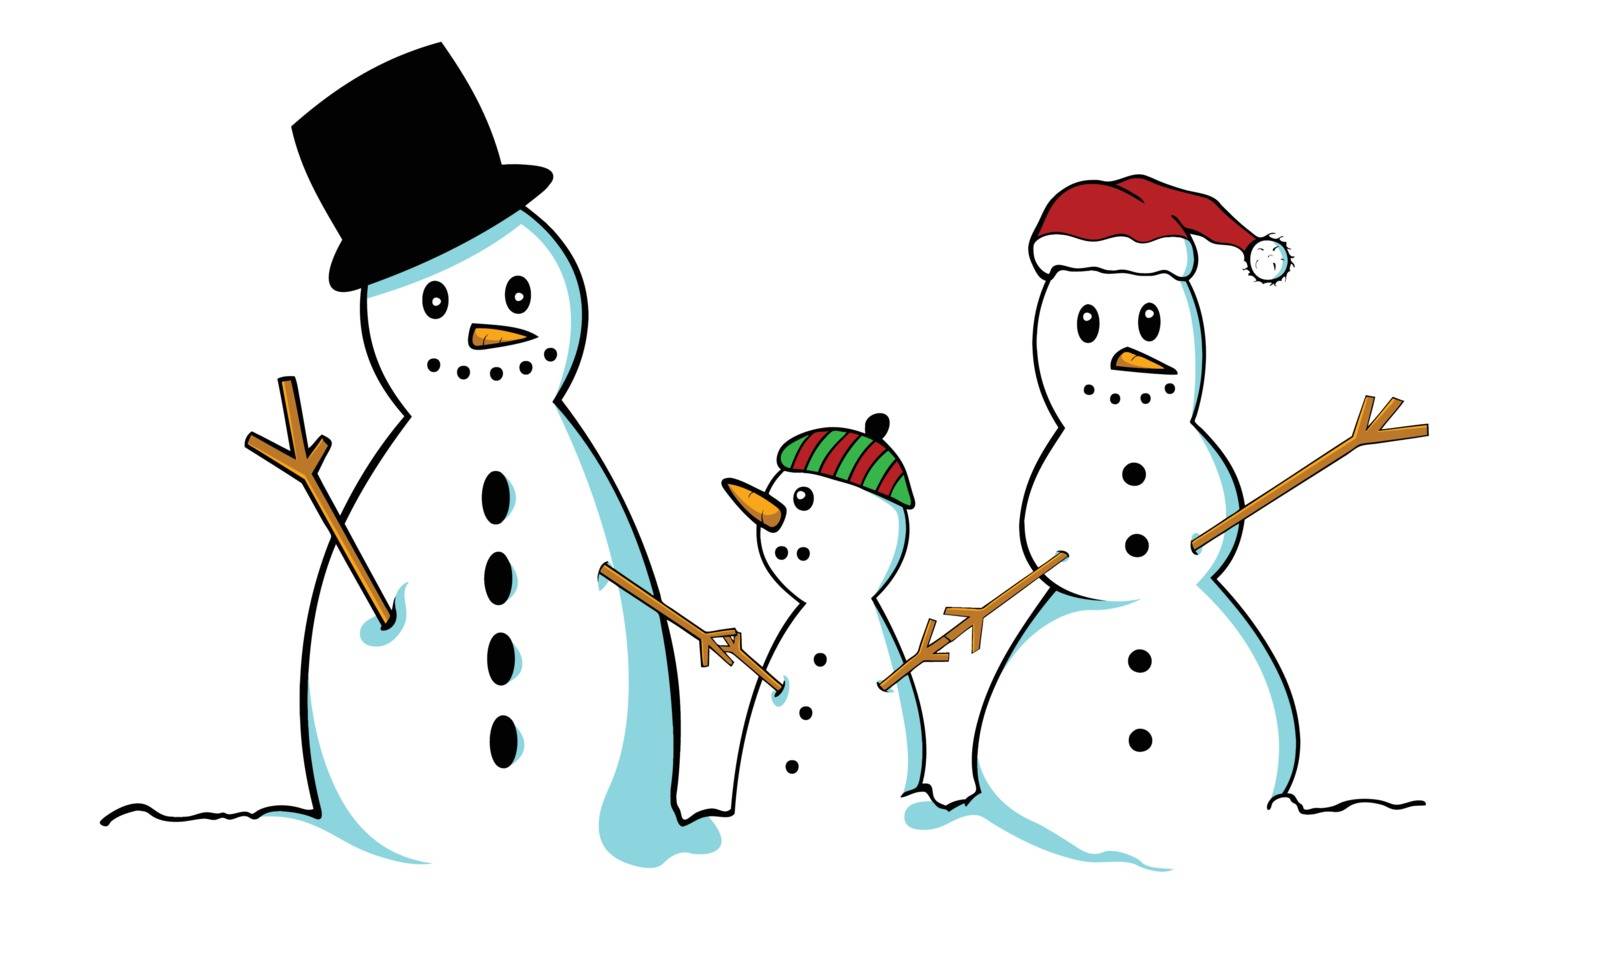 snowman family by laschi